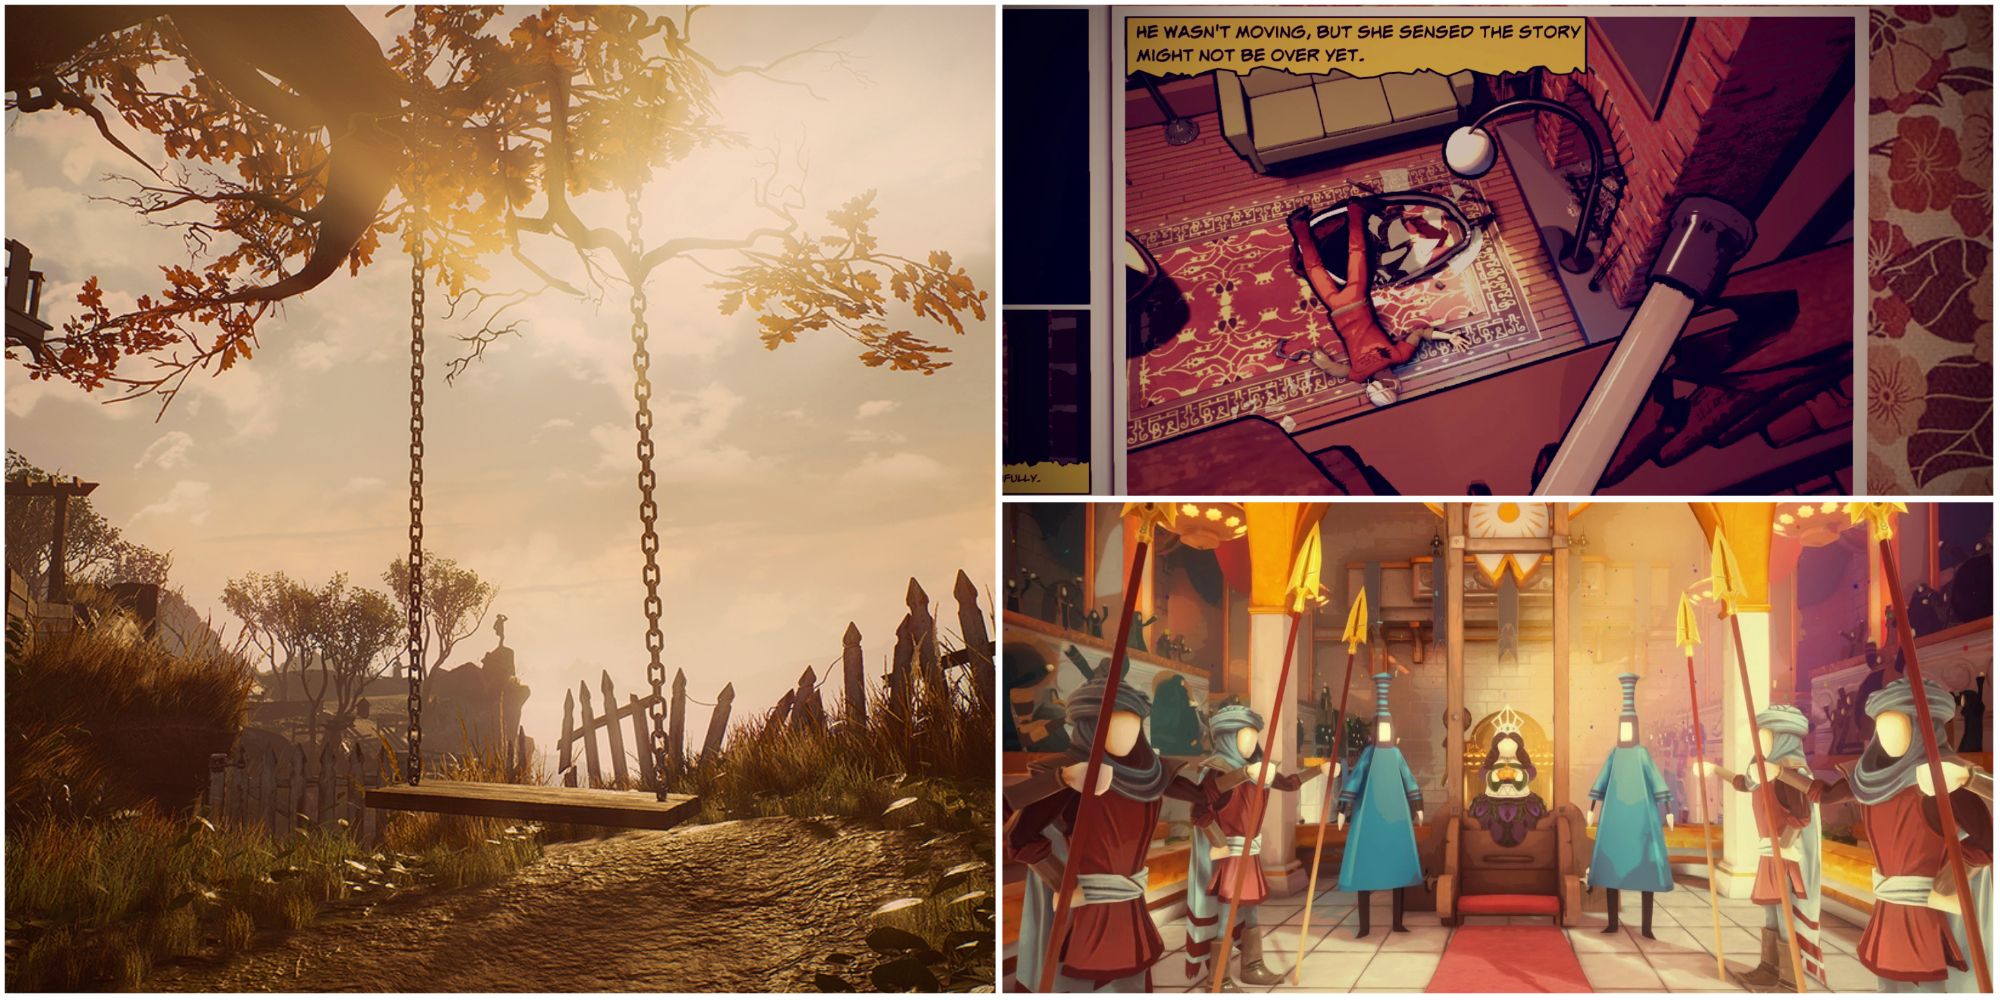 Collage of different scenes in What Remains of Edith Finch, including a swing, horror comic book and throne room